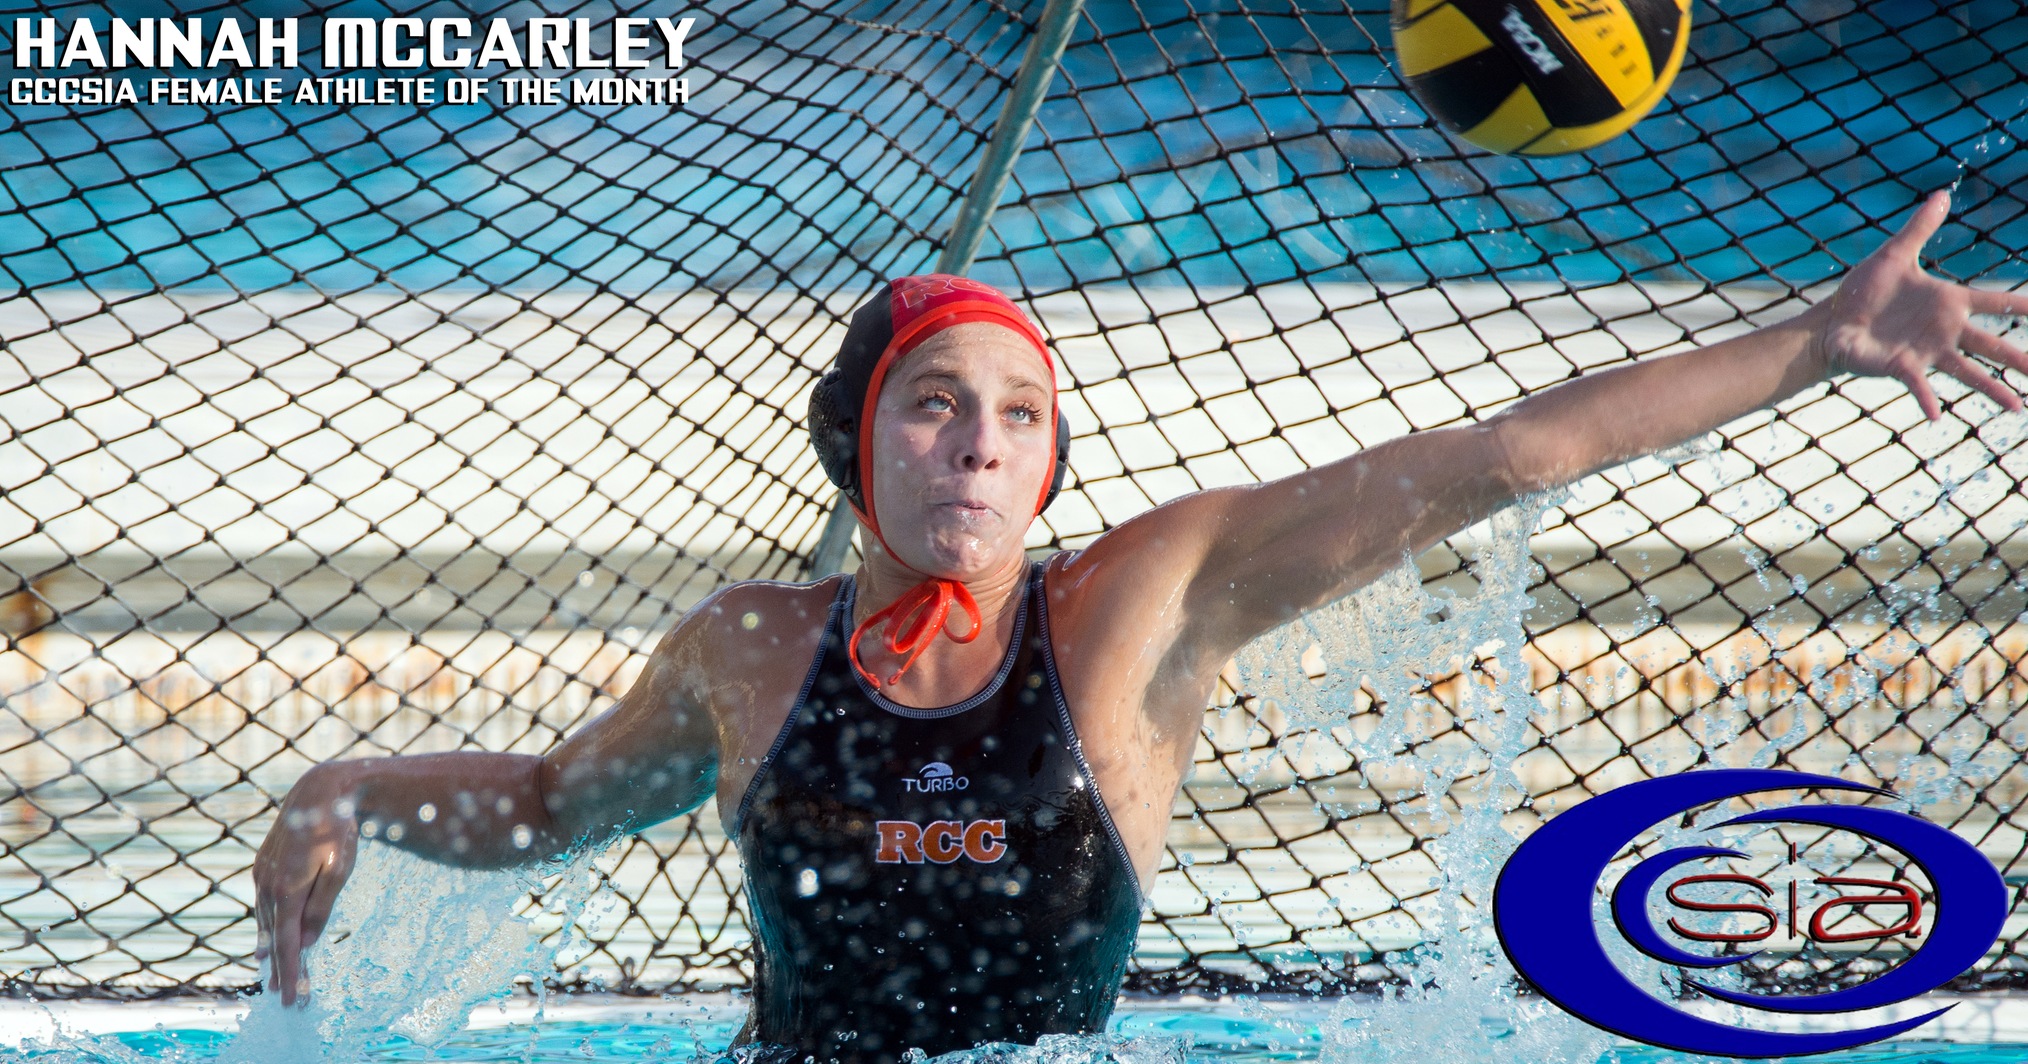 Hannah McCarley has been named the CCCSIA Female Athlete of the Month for September. She has dominated the cage by being ranked in the top-five in saves statewide while holding a 16-2 overall record thus far. (Photo by Michael Leone)